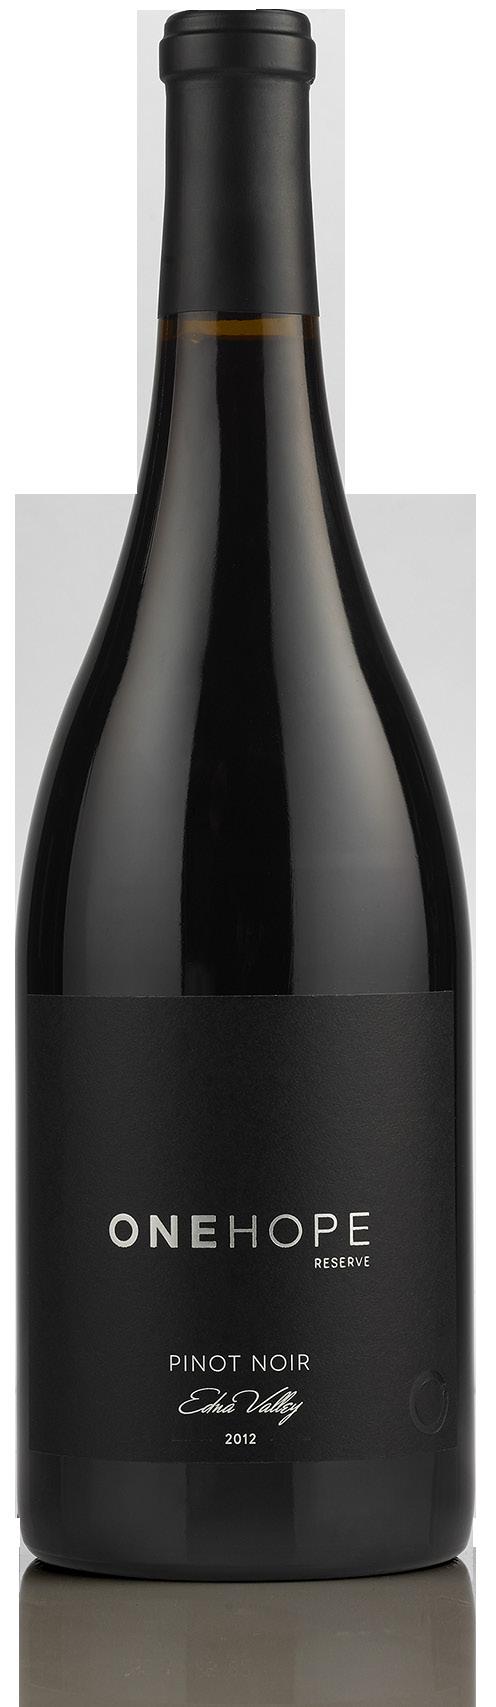 ONEHOPE EDNA VALLEY RESERVE PINOT NOIR ripe black cherry cola opulent vanilla Aromatically complex, dark cherries are layered with rose petals and minty notes.